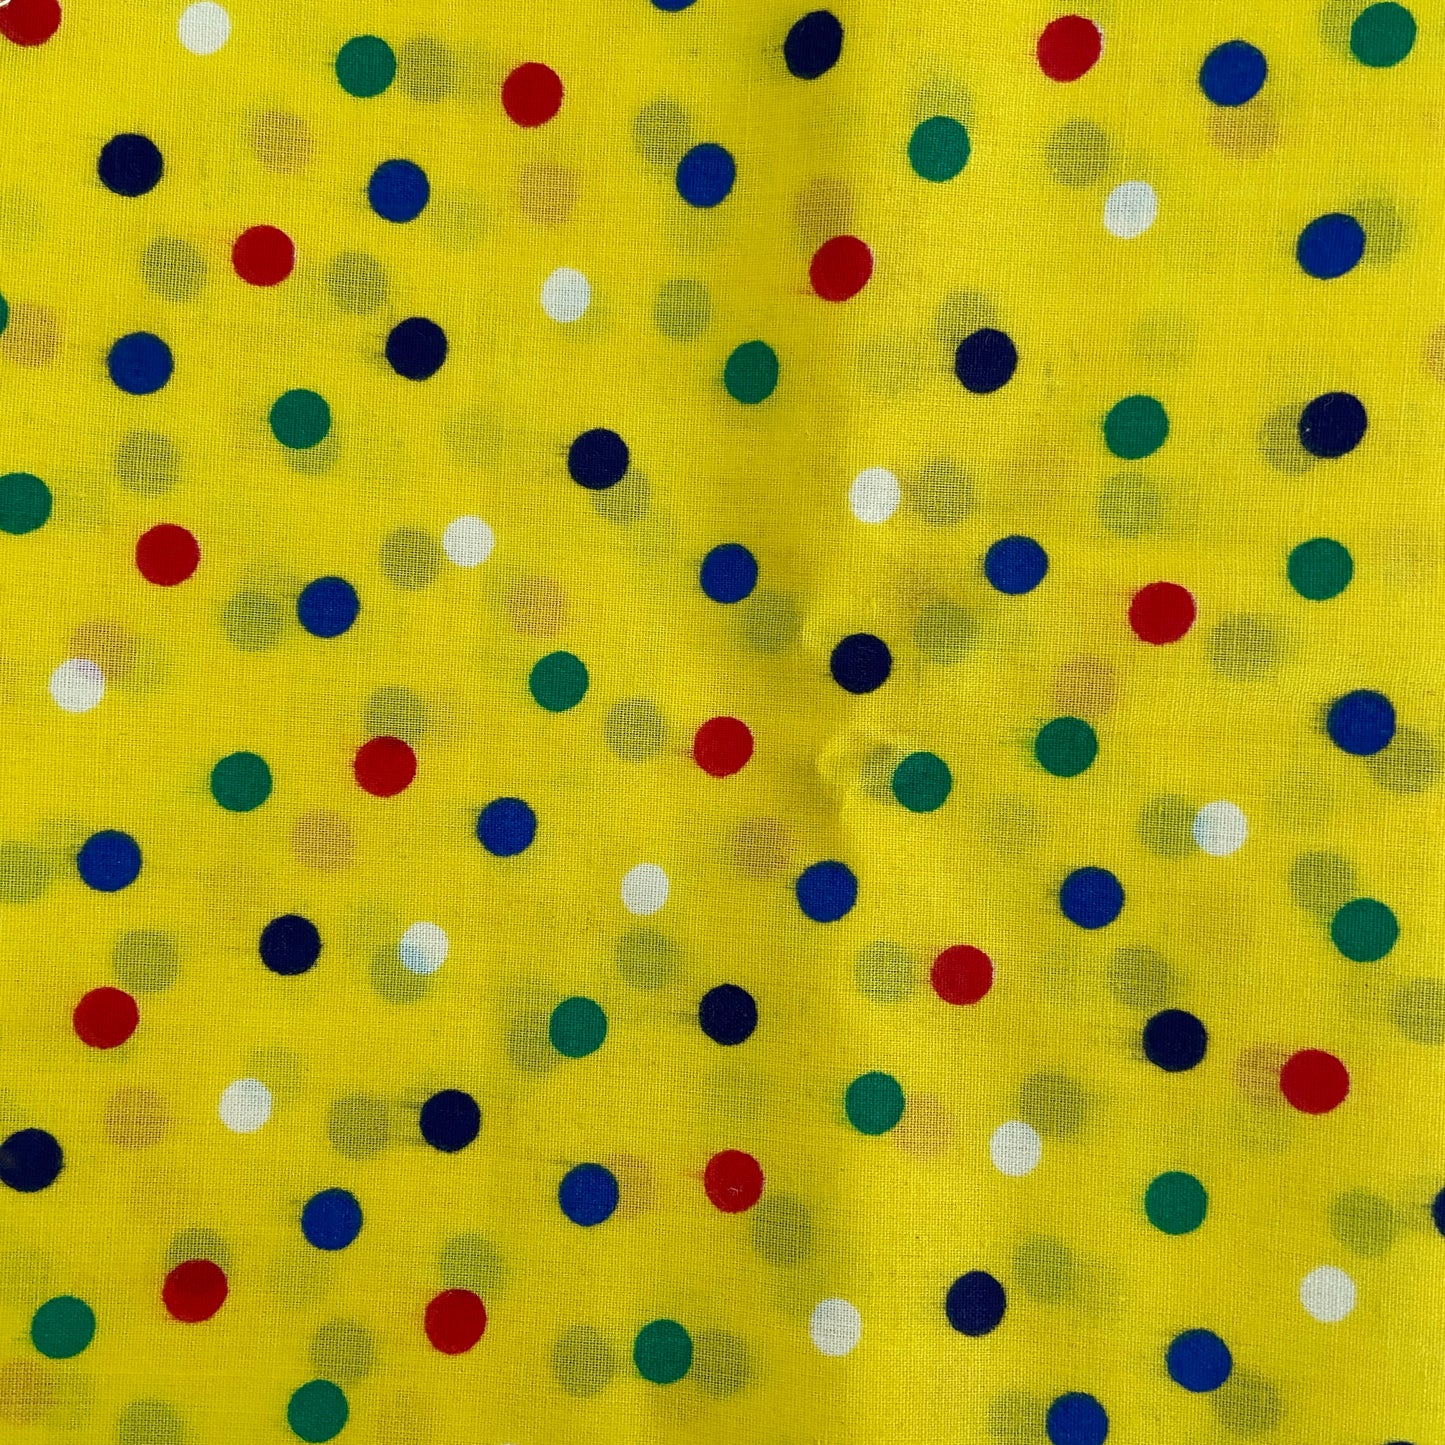 150cms Bright Cotton Polka Dot Fabric Vintage Quilting Project